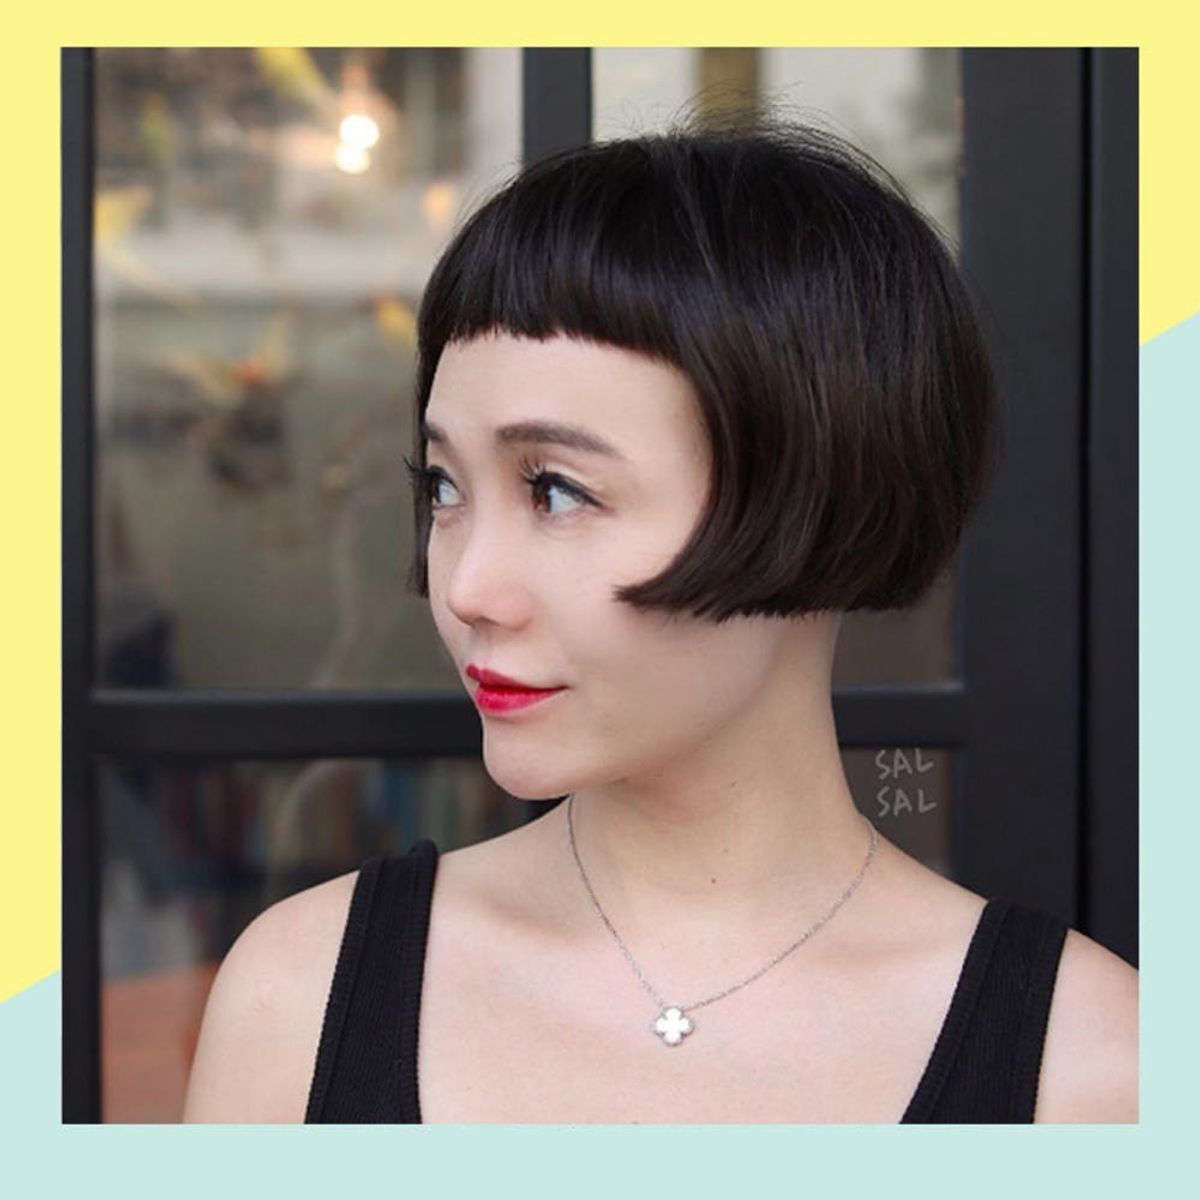 The Sci-Fi Bob Is the Out-of-This-World Hair Trend for Fall